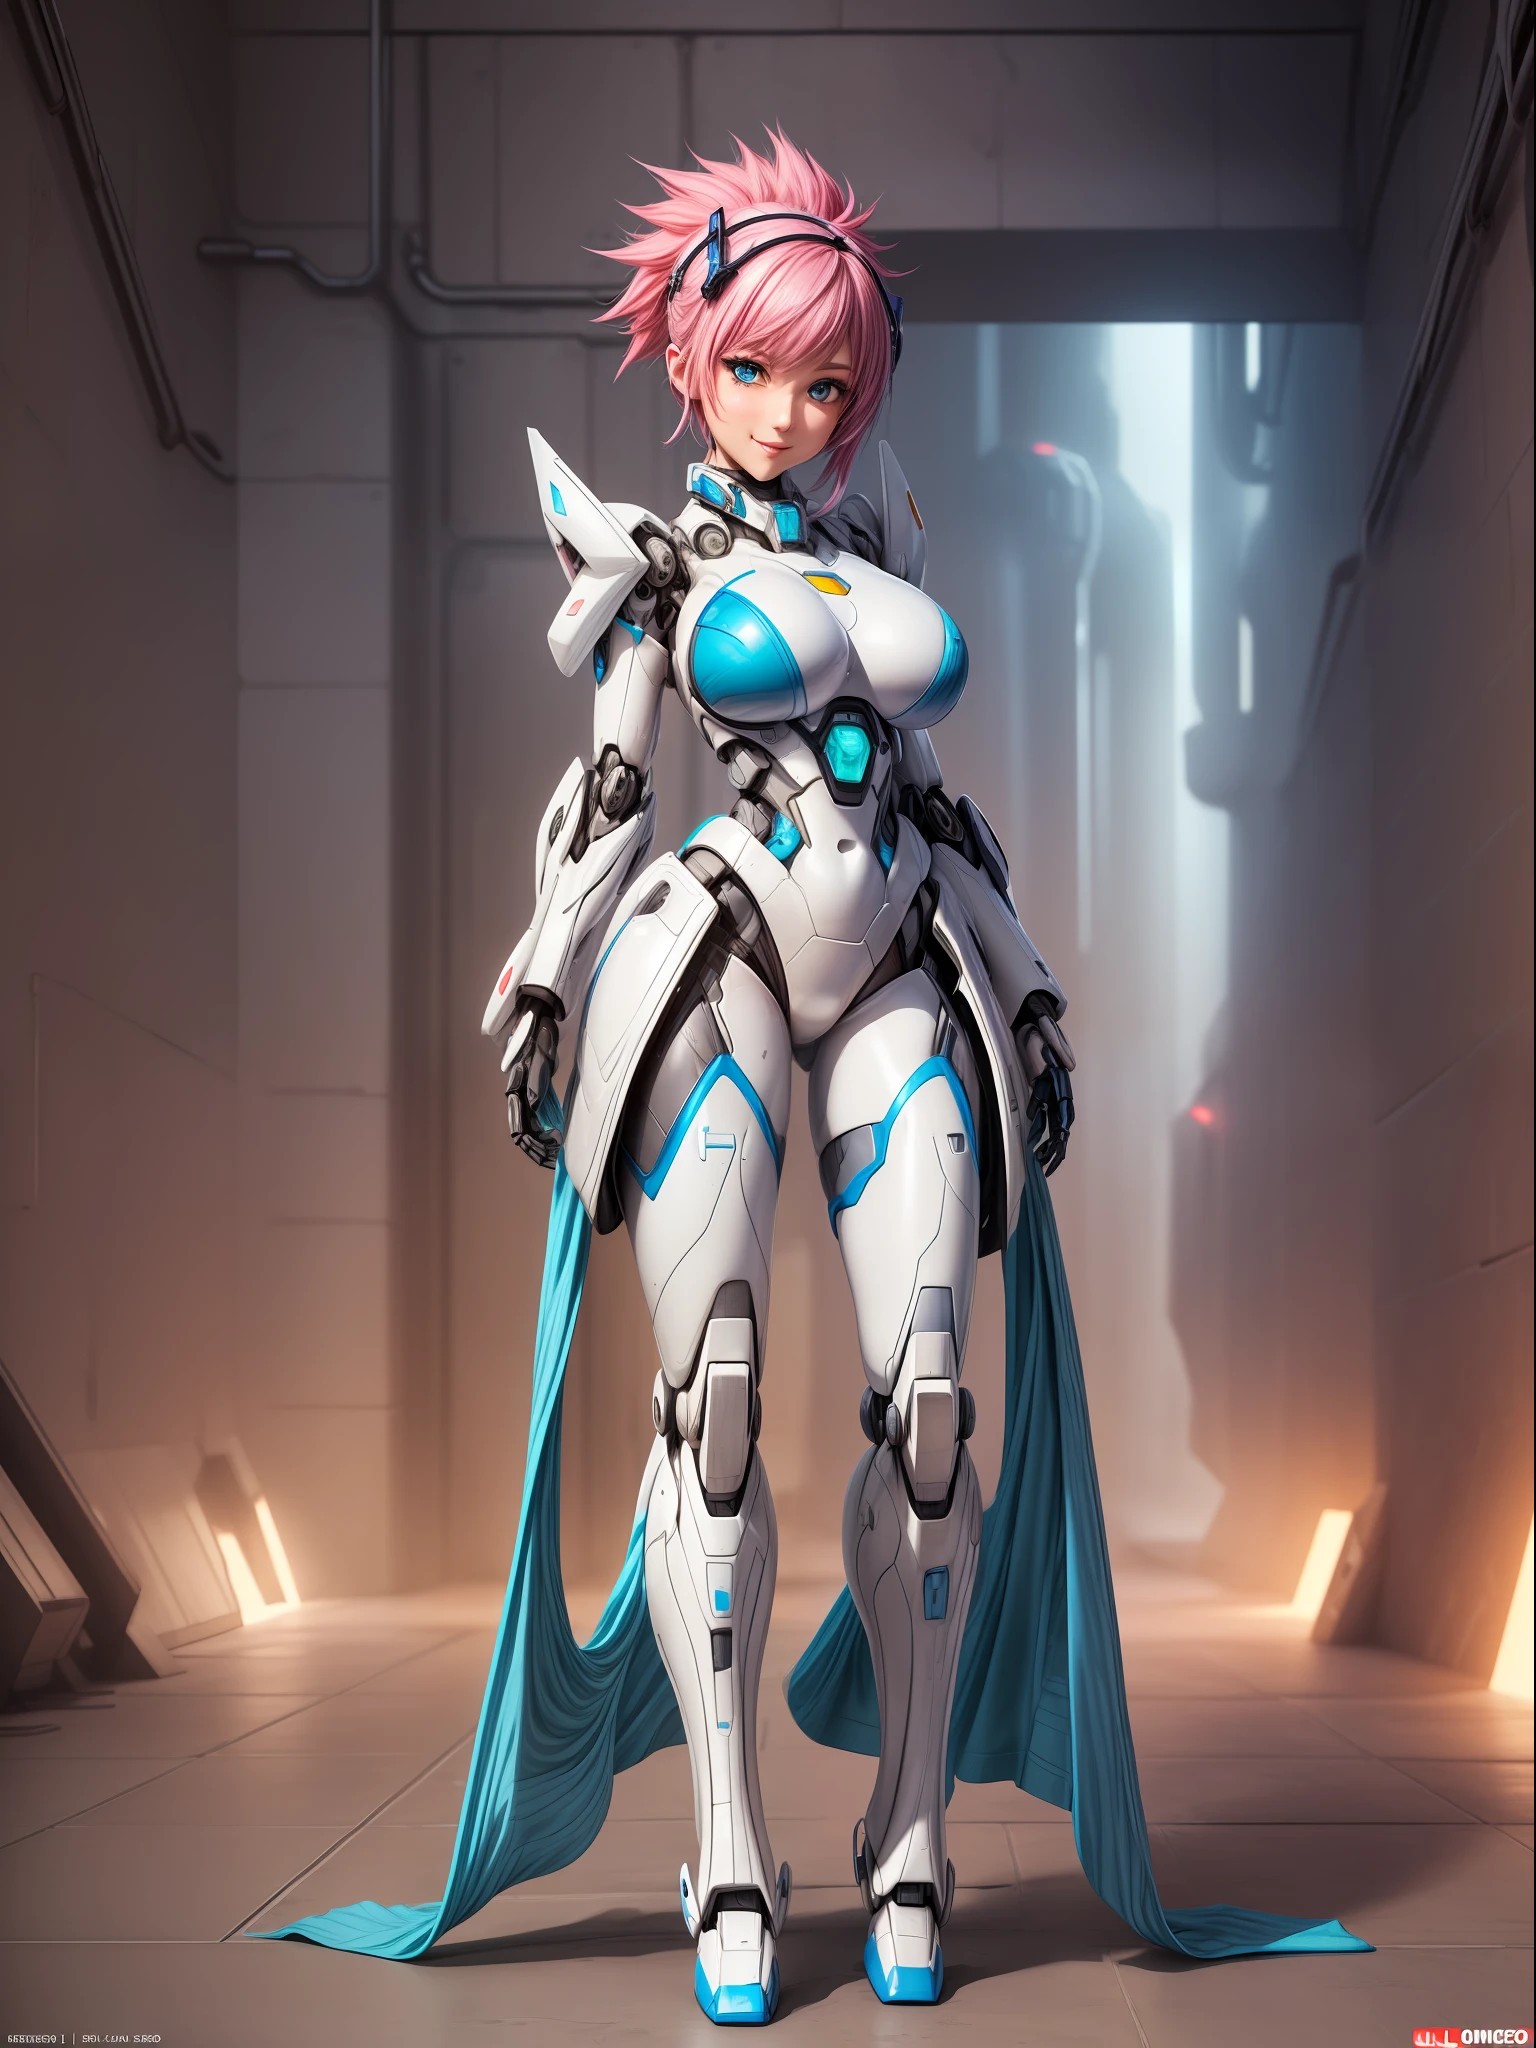 ((Full body/standing):2) {((Only 1 woman):1.2)}: ((Wearing white mecha suit with blue parts, extremely tight on the body):1.5), has ((extremely large breasts): 1.2), only she has ((pink mohawk hair, blue eyes):1.2), is ((leaning against the wall, doing erotic pose for the viewer, smiling)). \n Background:((in a futuristic dungeon full of giant robots):1.5). anime, anime style, 16k, high resolution, ((best quality, high detail: 1.3)), UHD, ((masterpiece))